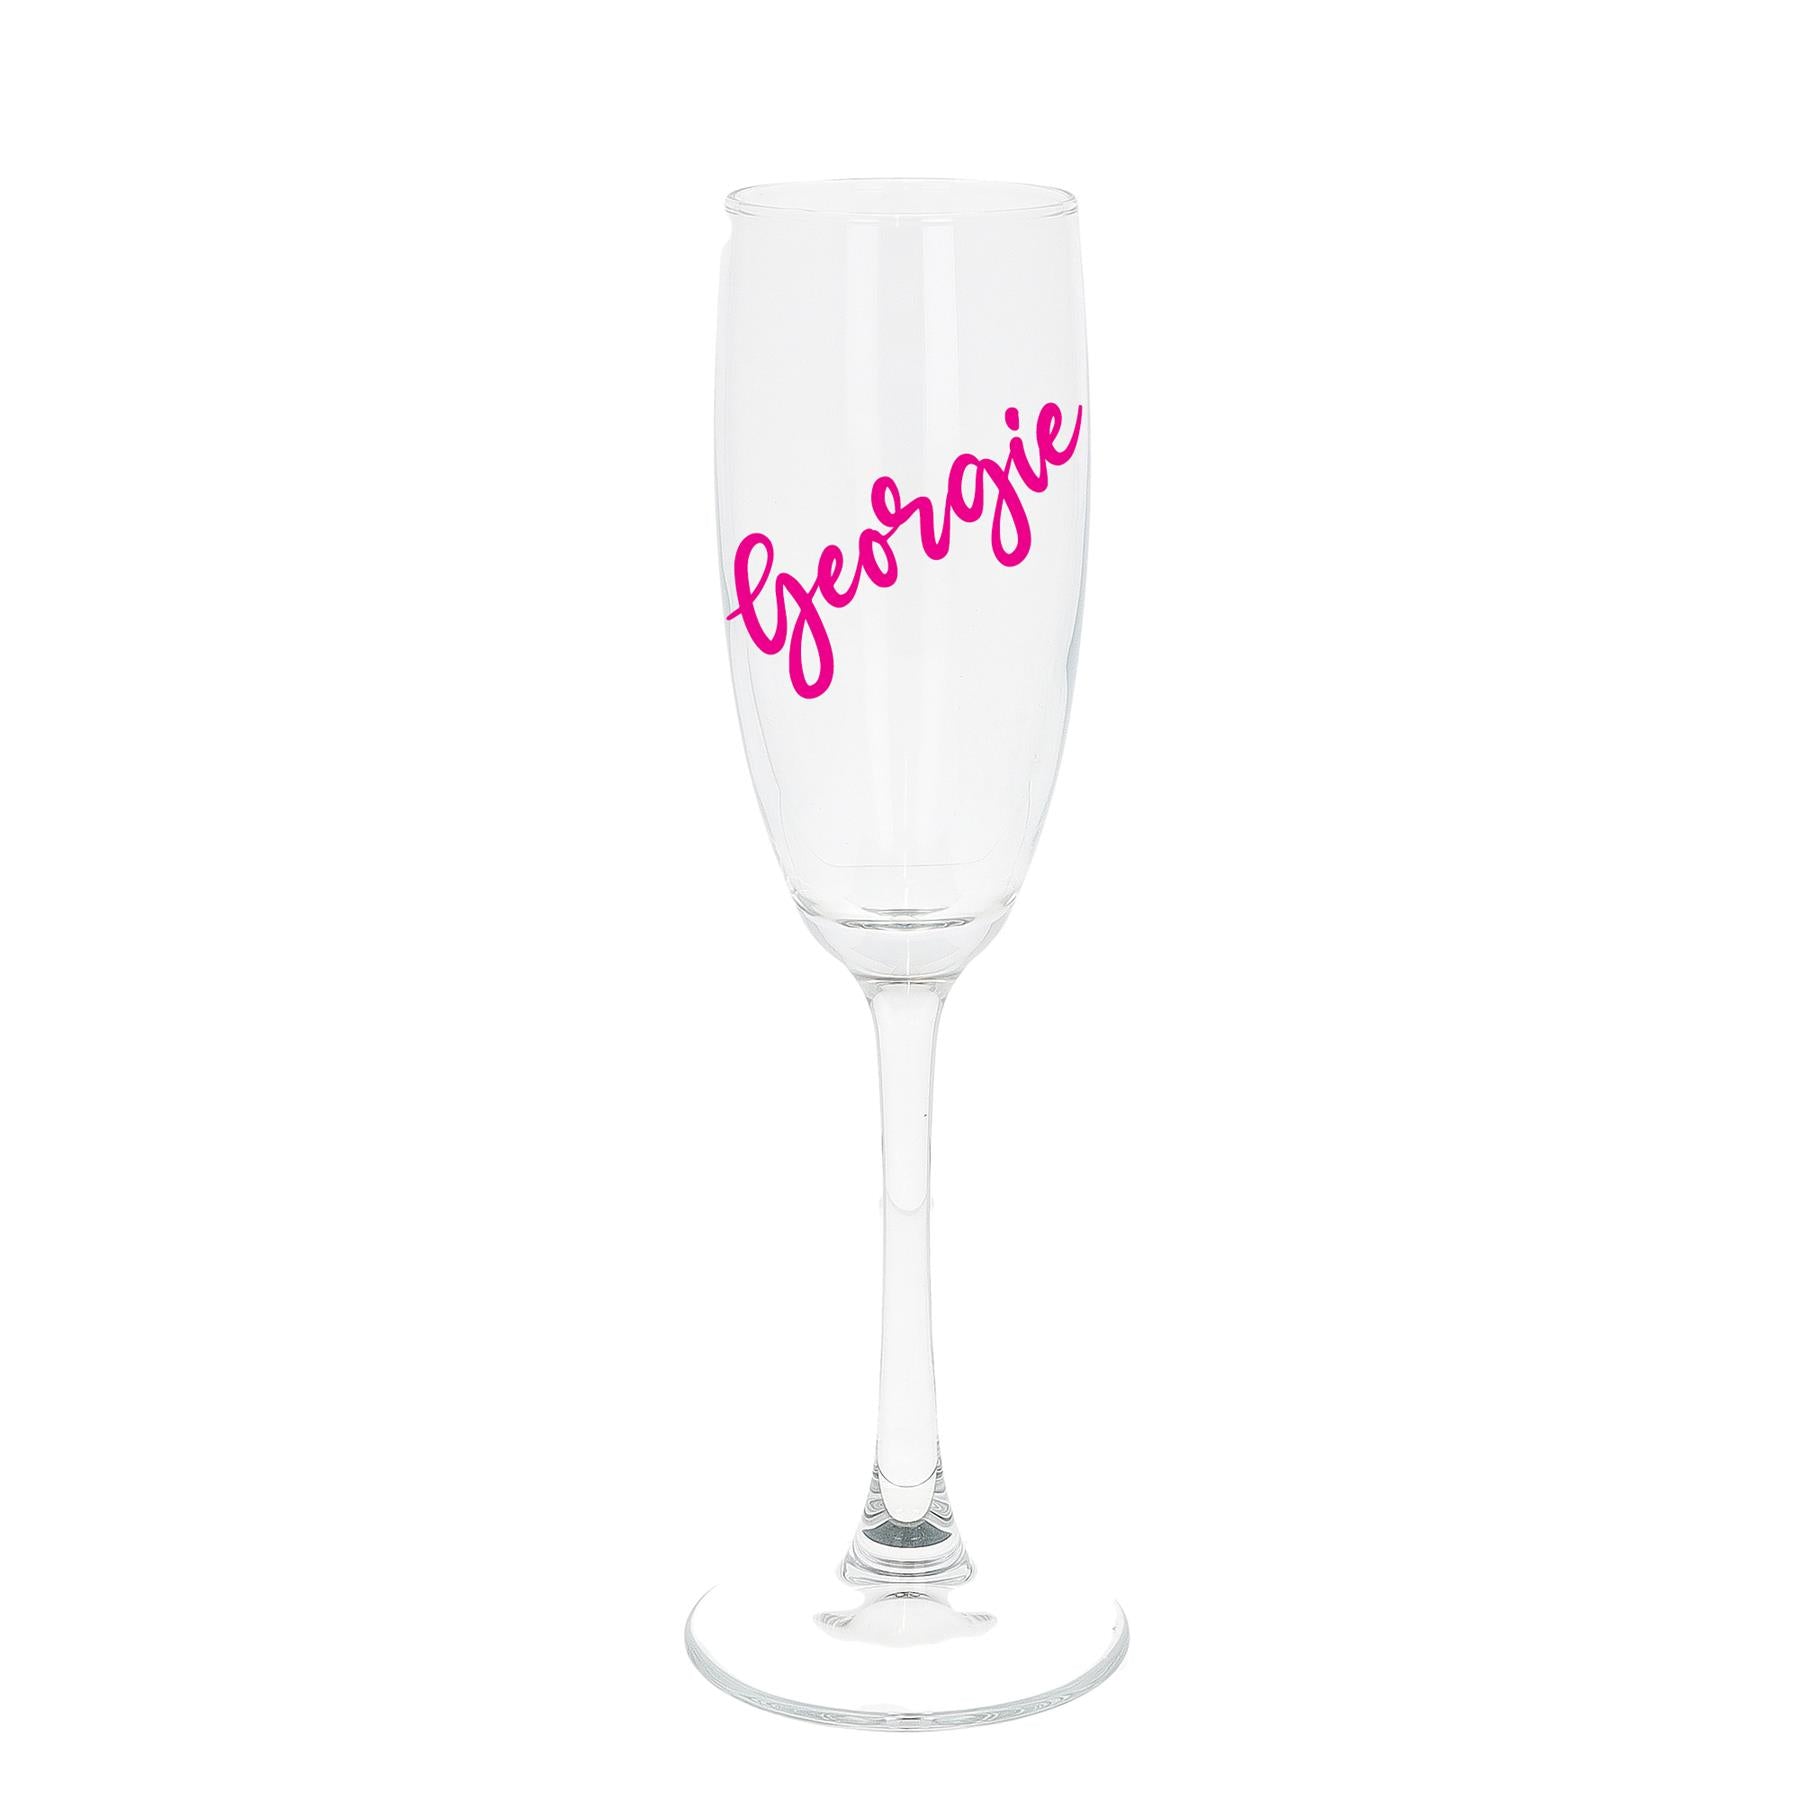 Personalised Prosecco / Champagne Glass Filled with Spa Pamper Gifts  - Always Looking Good -   